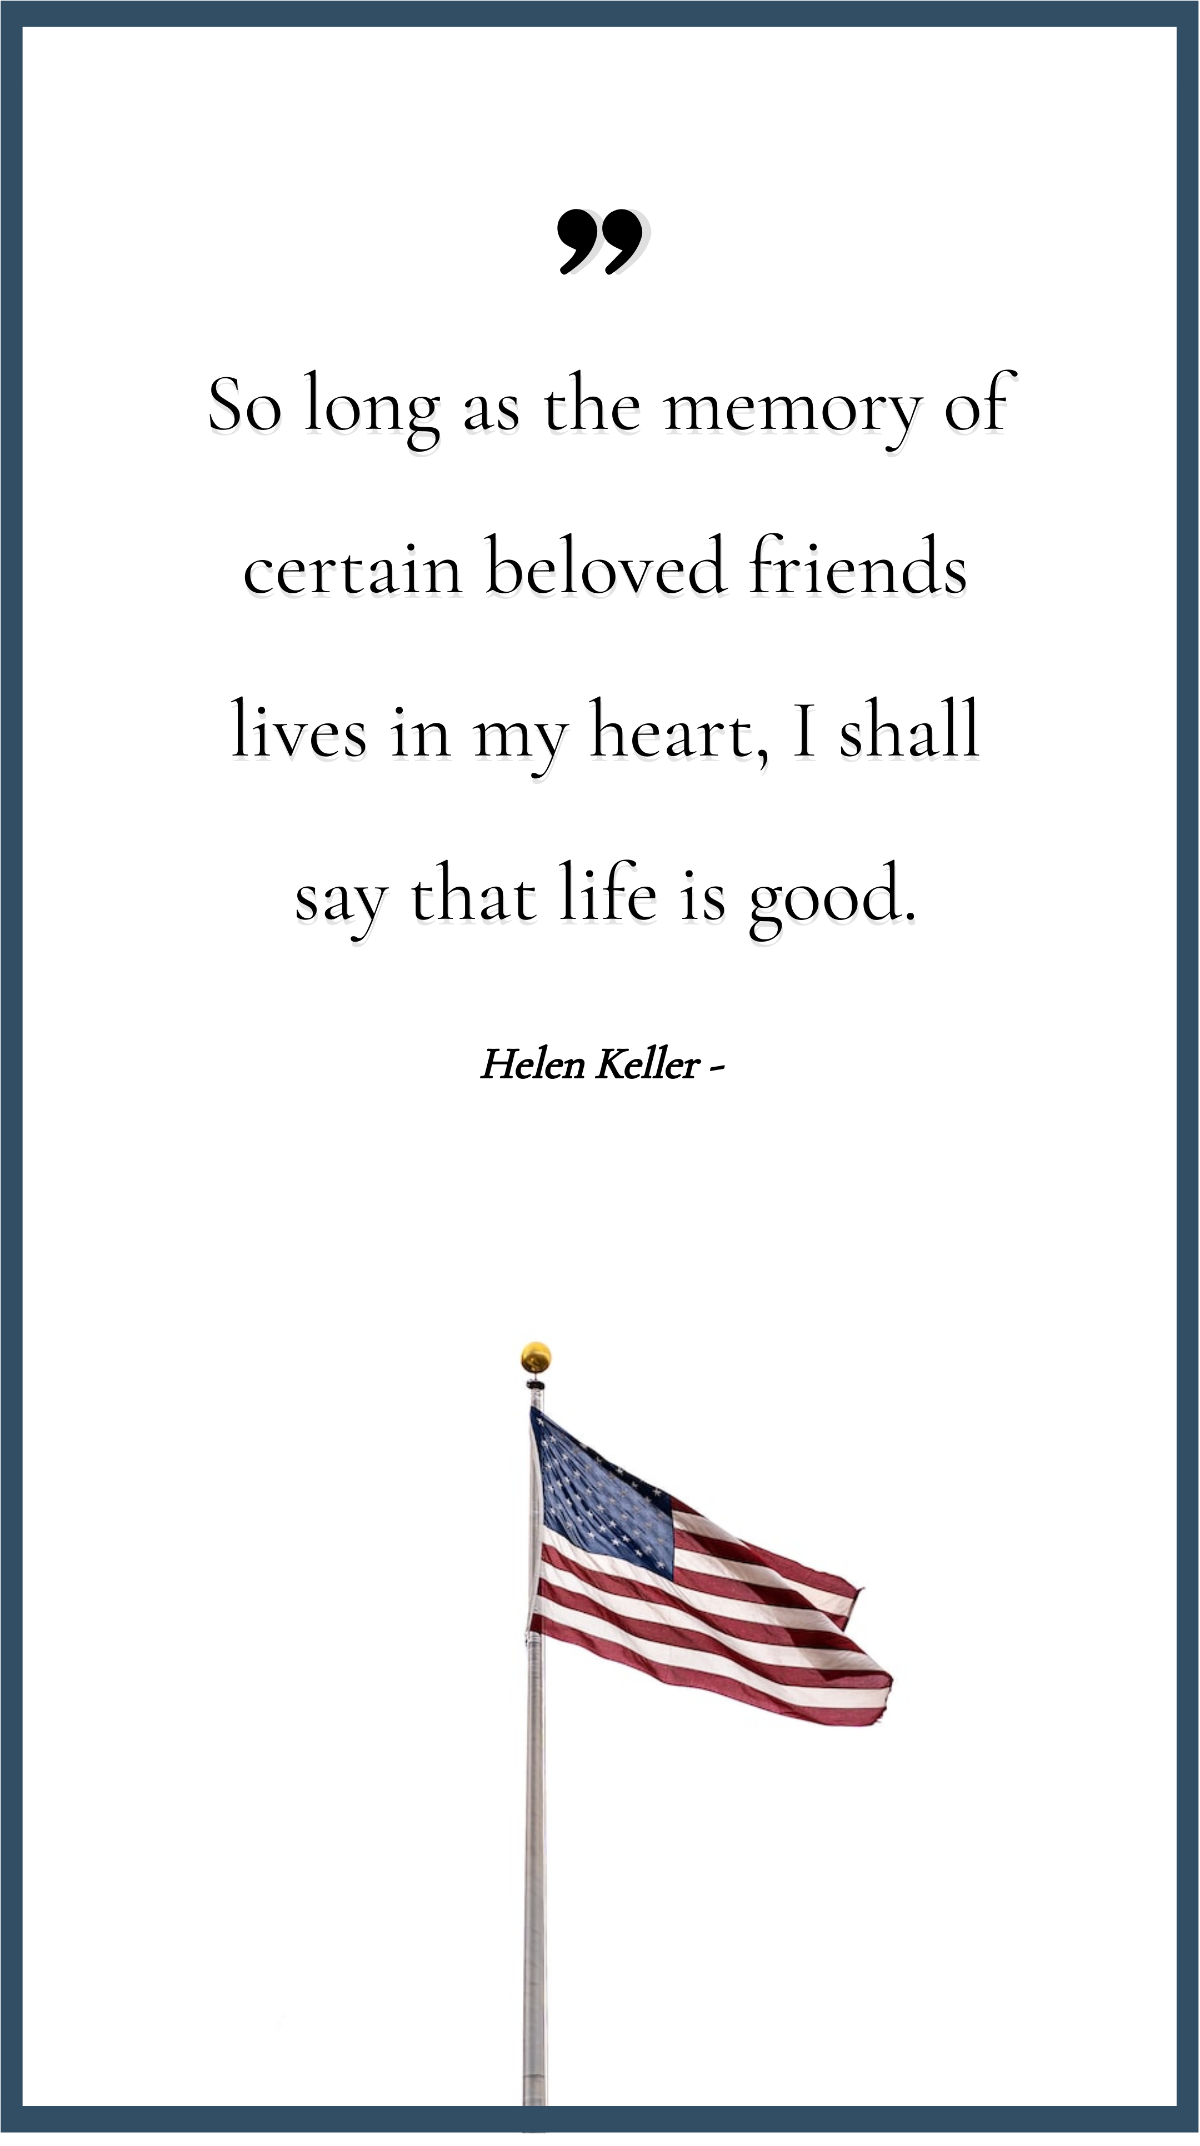 Helen Keller - So long as the memory of certain beloved friends lives in my heart, I shall say that life is good.